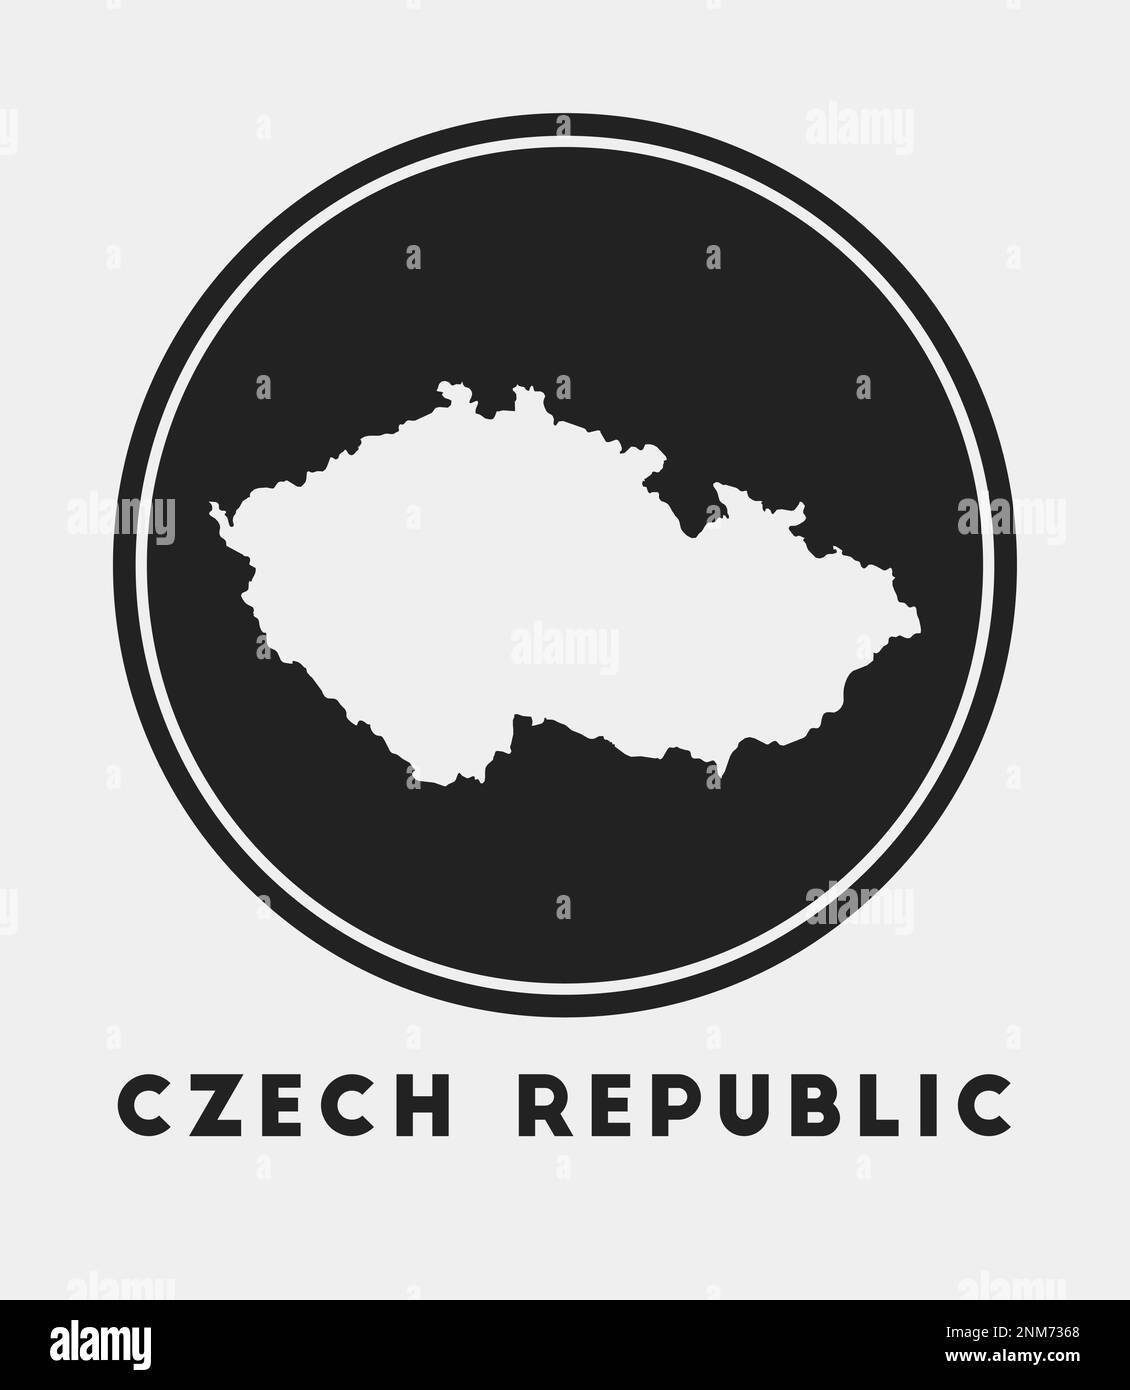 Czech Republic icon. Round logo with country map and title. Stylish Czech Republic badge with map. Vector illustration. Stock Vector